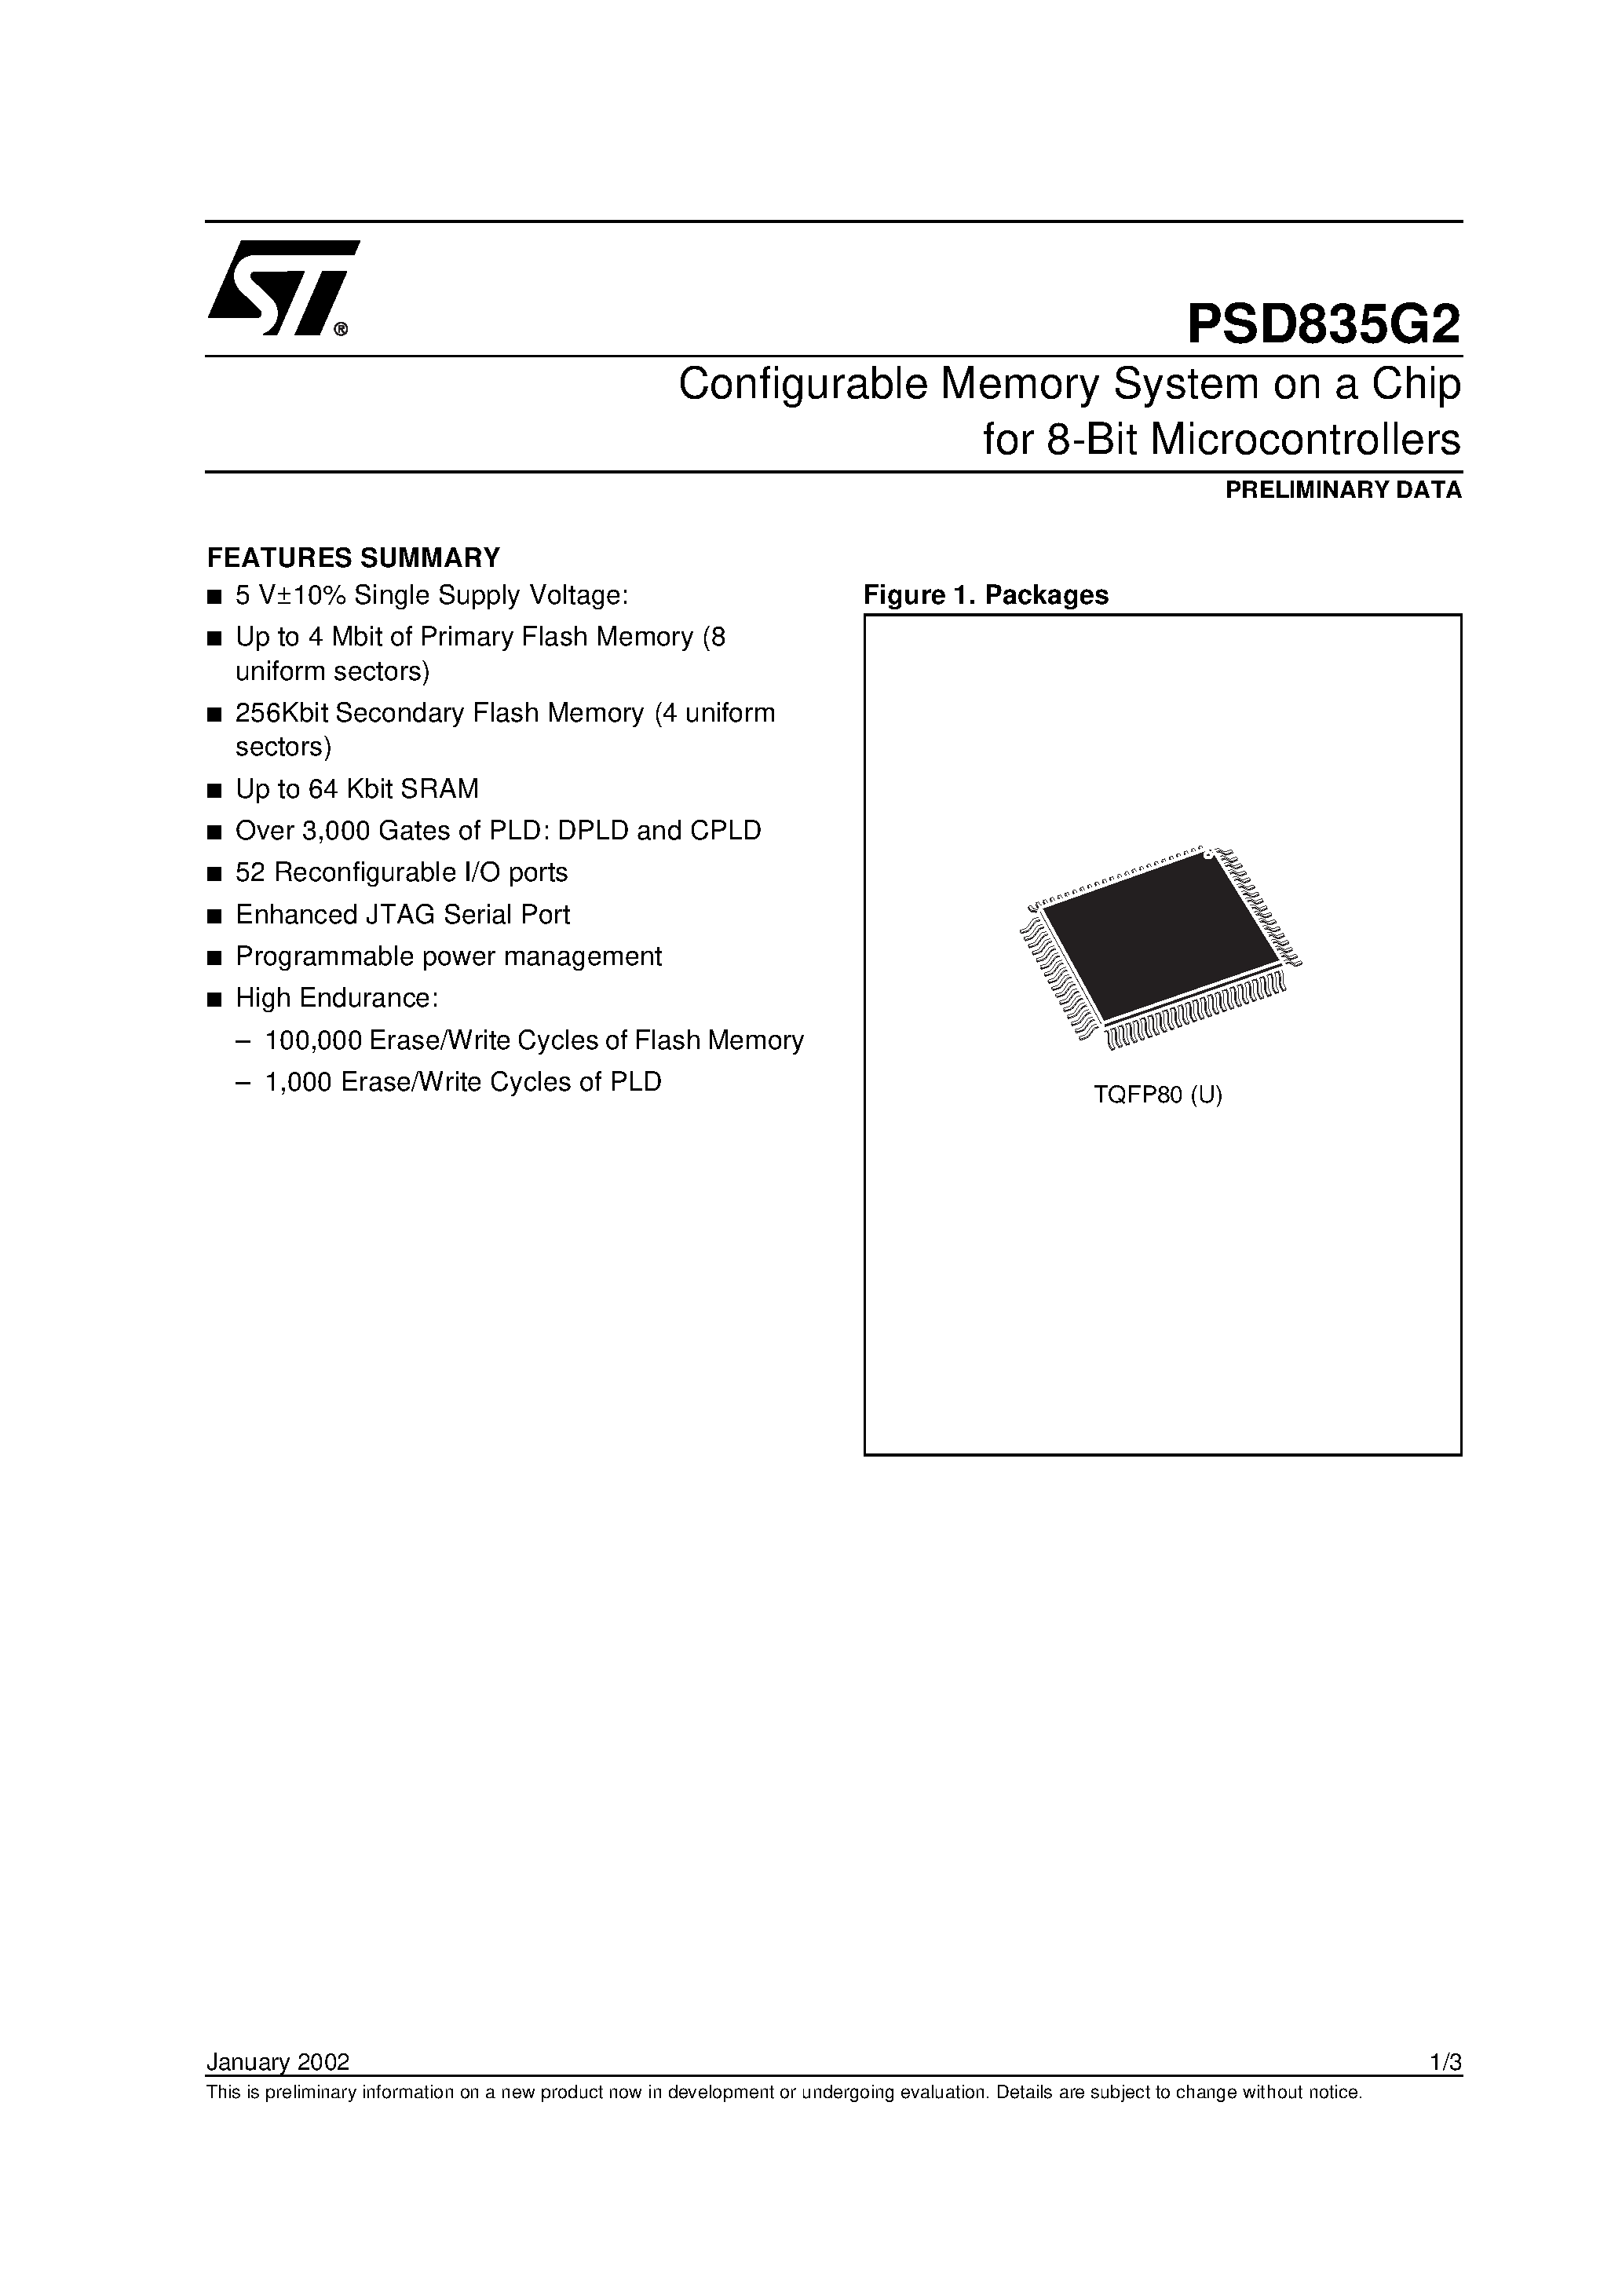 Datasheet PSD835F1-A-90UI - Configurable Memory System on a Chip for 8-Bit Microcontrollers page 1